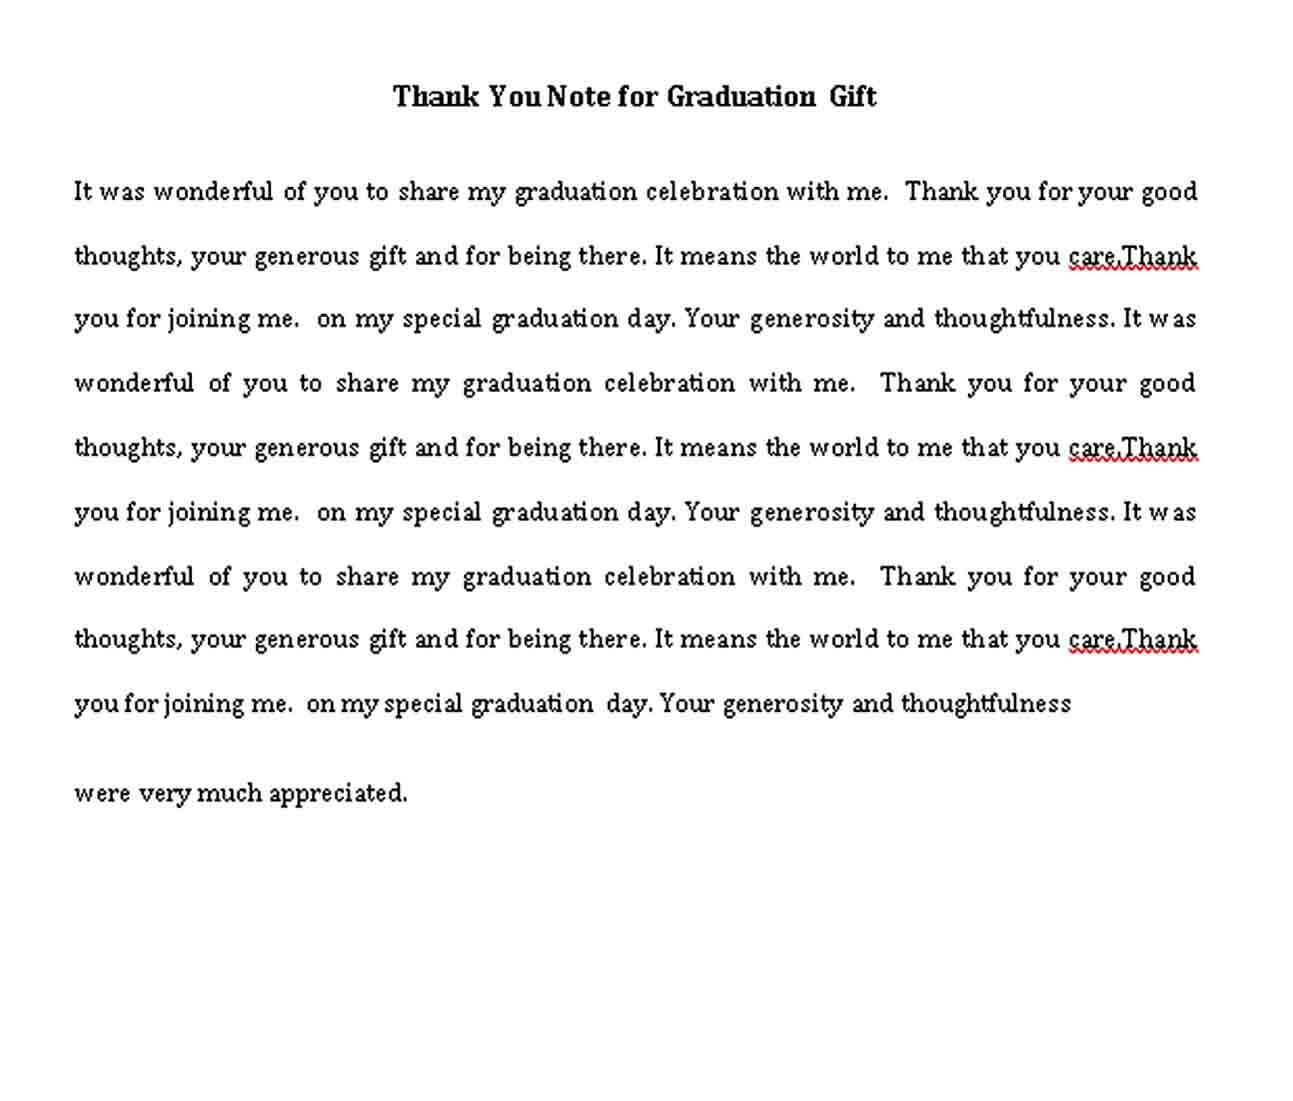 thank you note for graduation gift